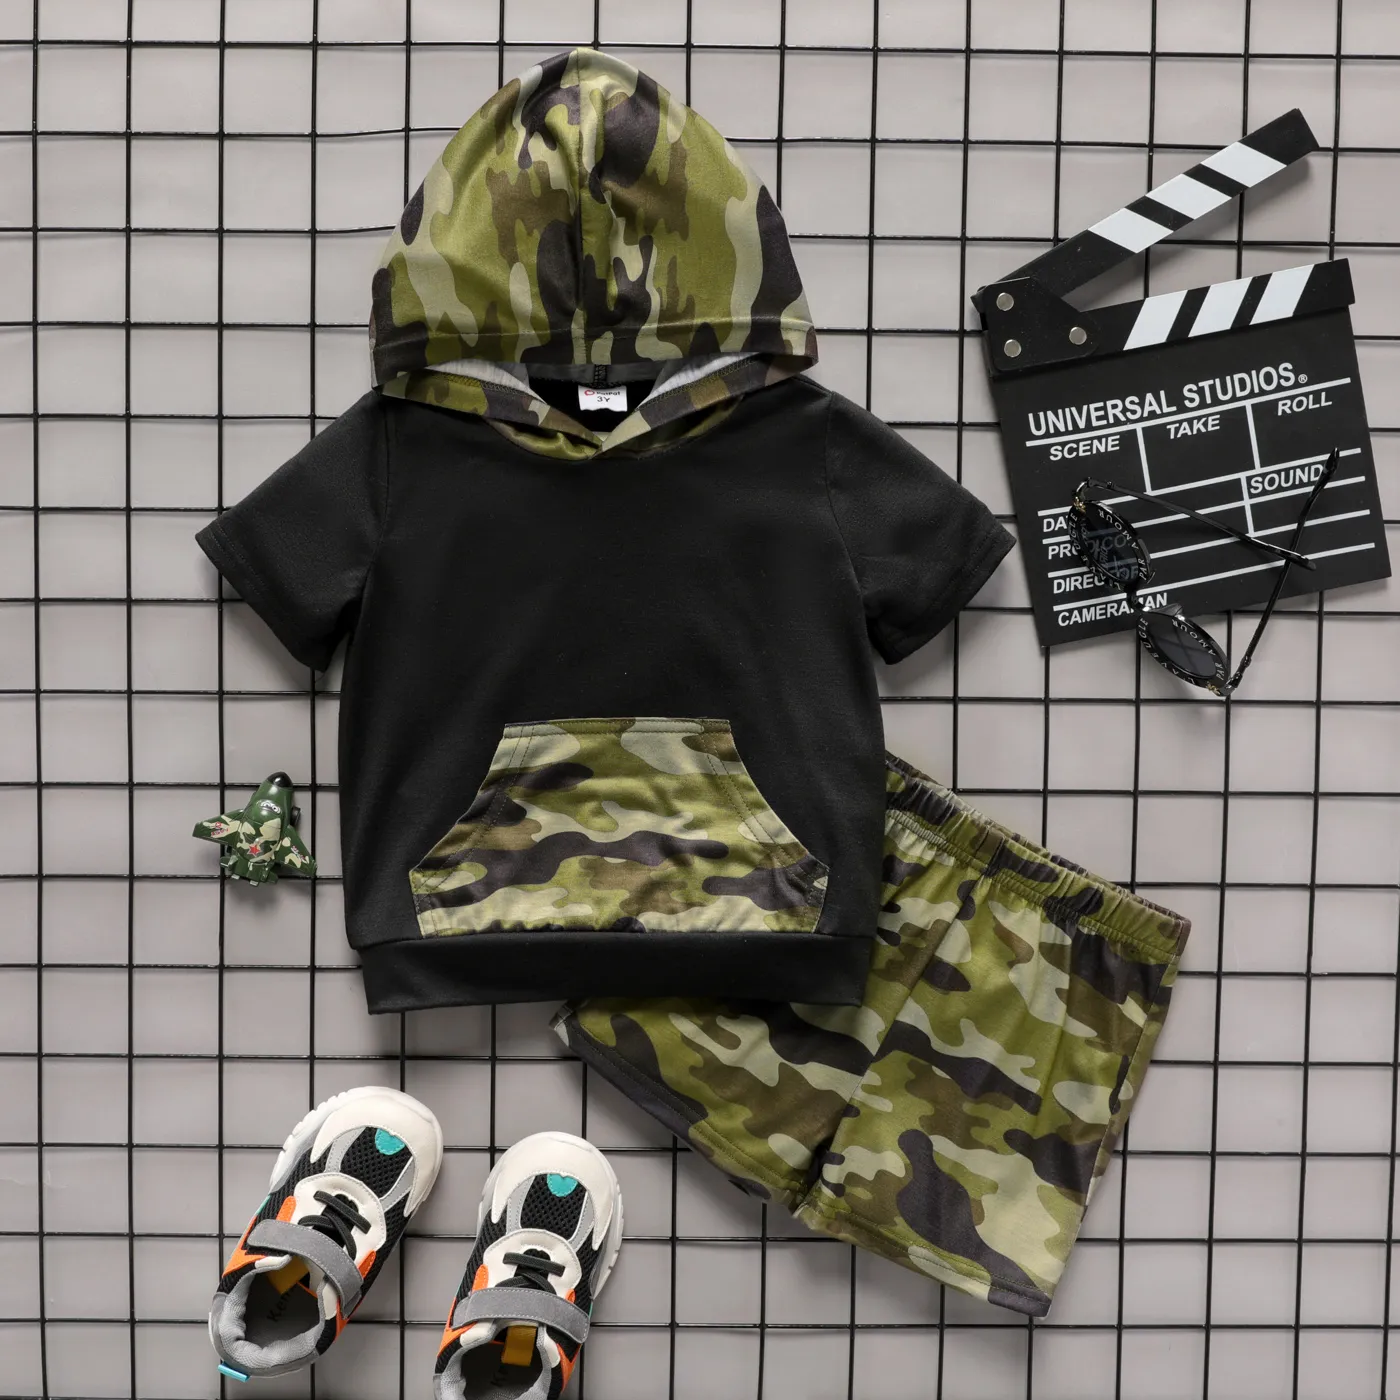 2-piece Toddler Boy Camouflage Print Hooded Tee and Elasticized Shorts Set